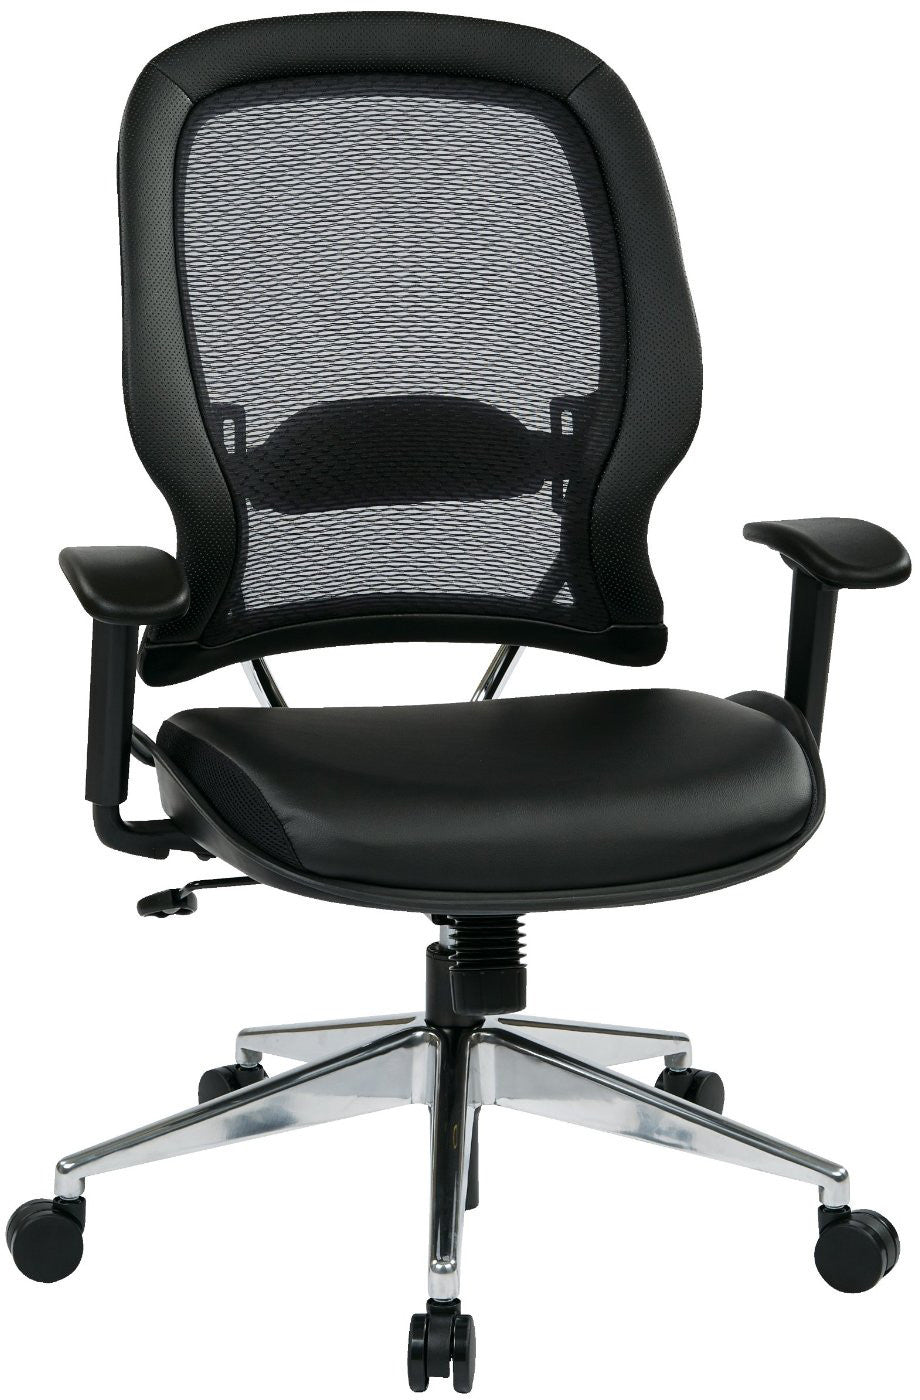 Space Seating 335-e37p918p Professional Air Grid¨ Back Chair With Eco Leather Seat